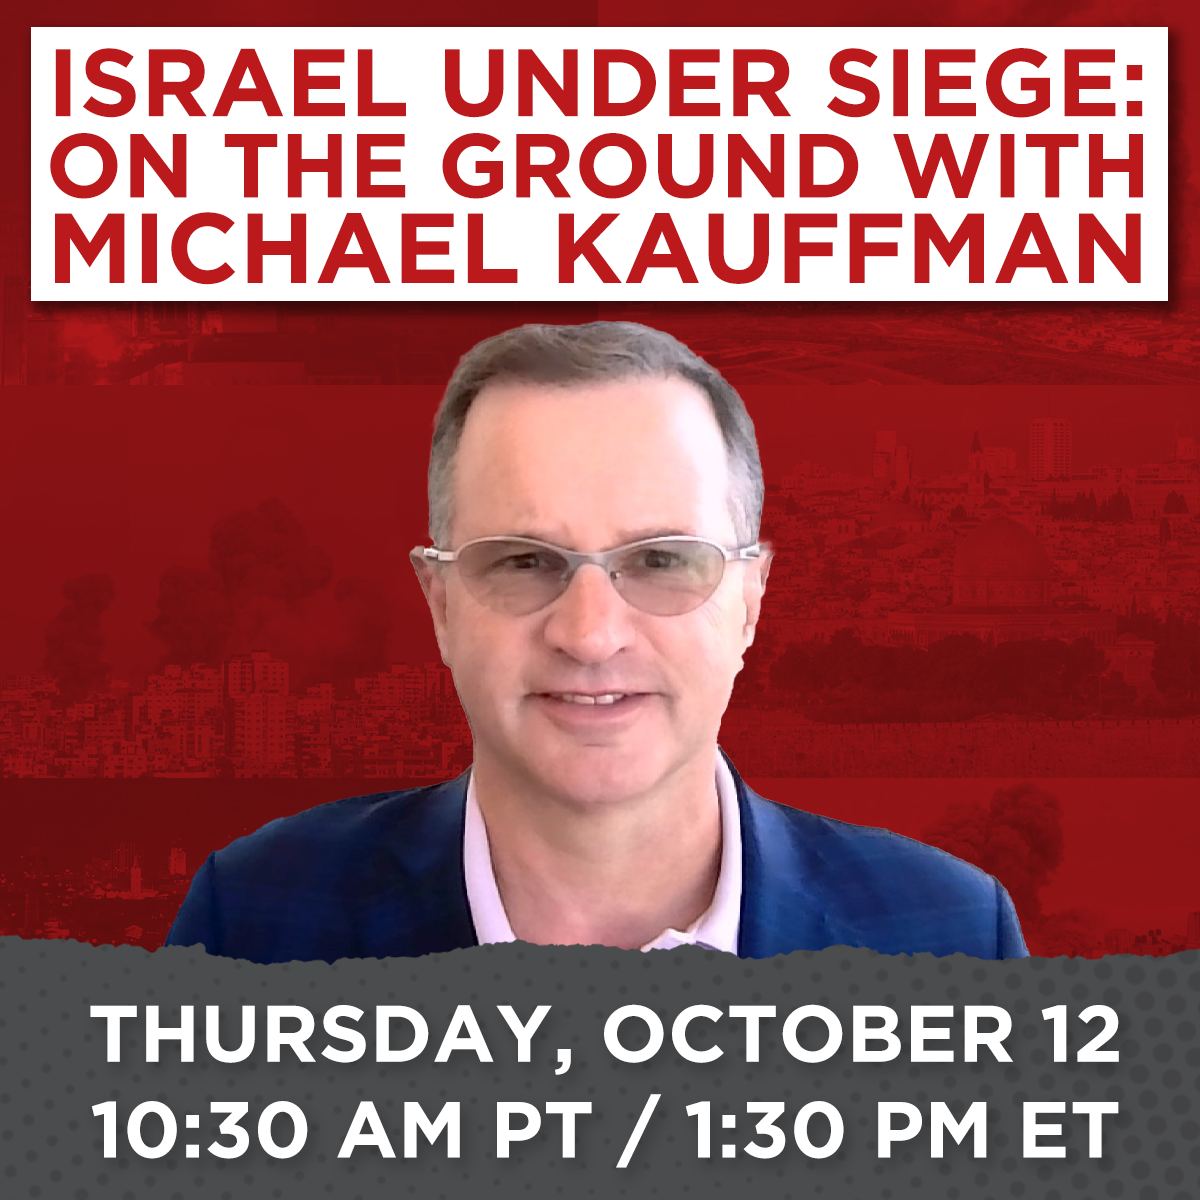 ISRAEL UNDER SEIGE: On the Ground with Michael Kauffman